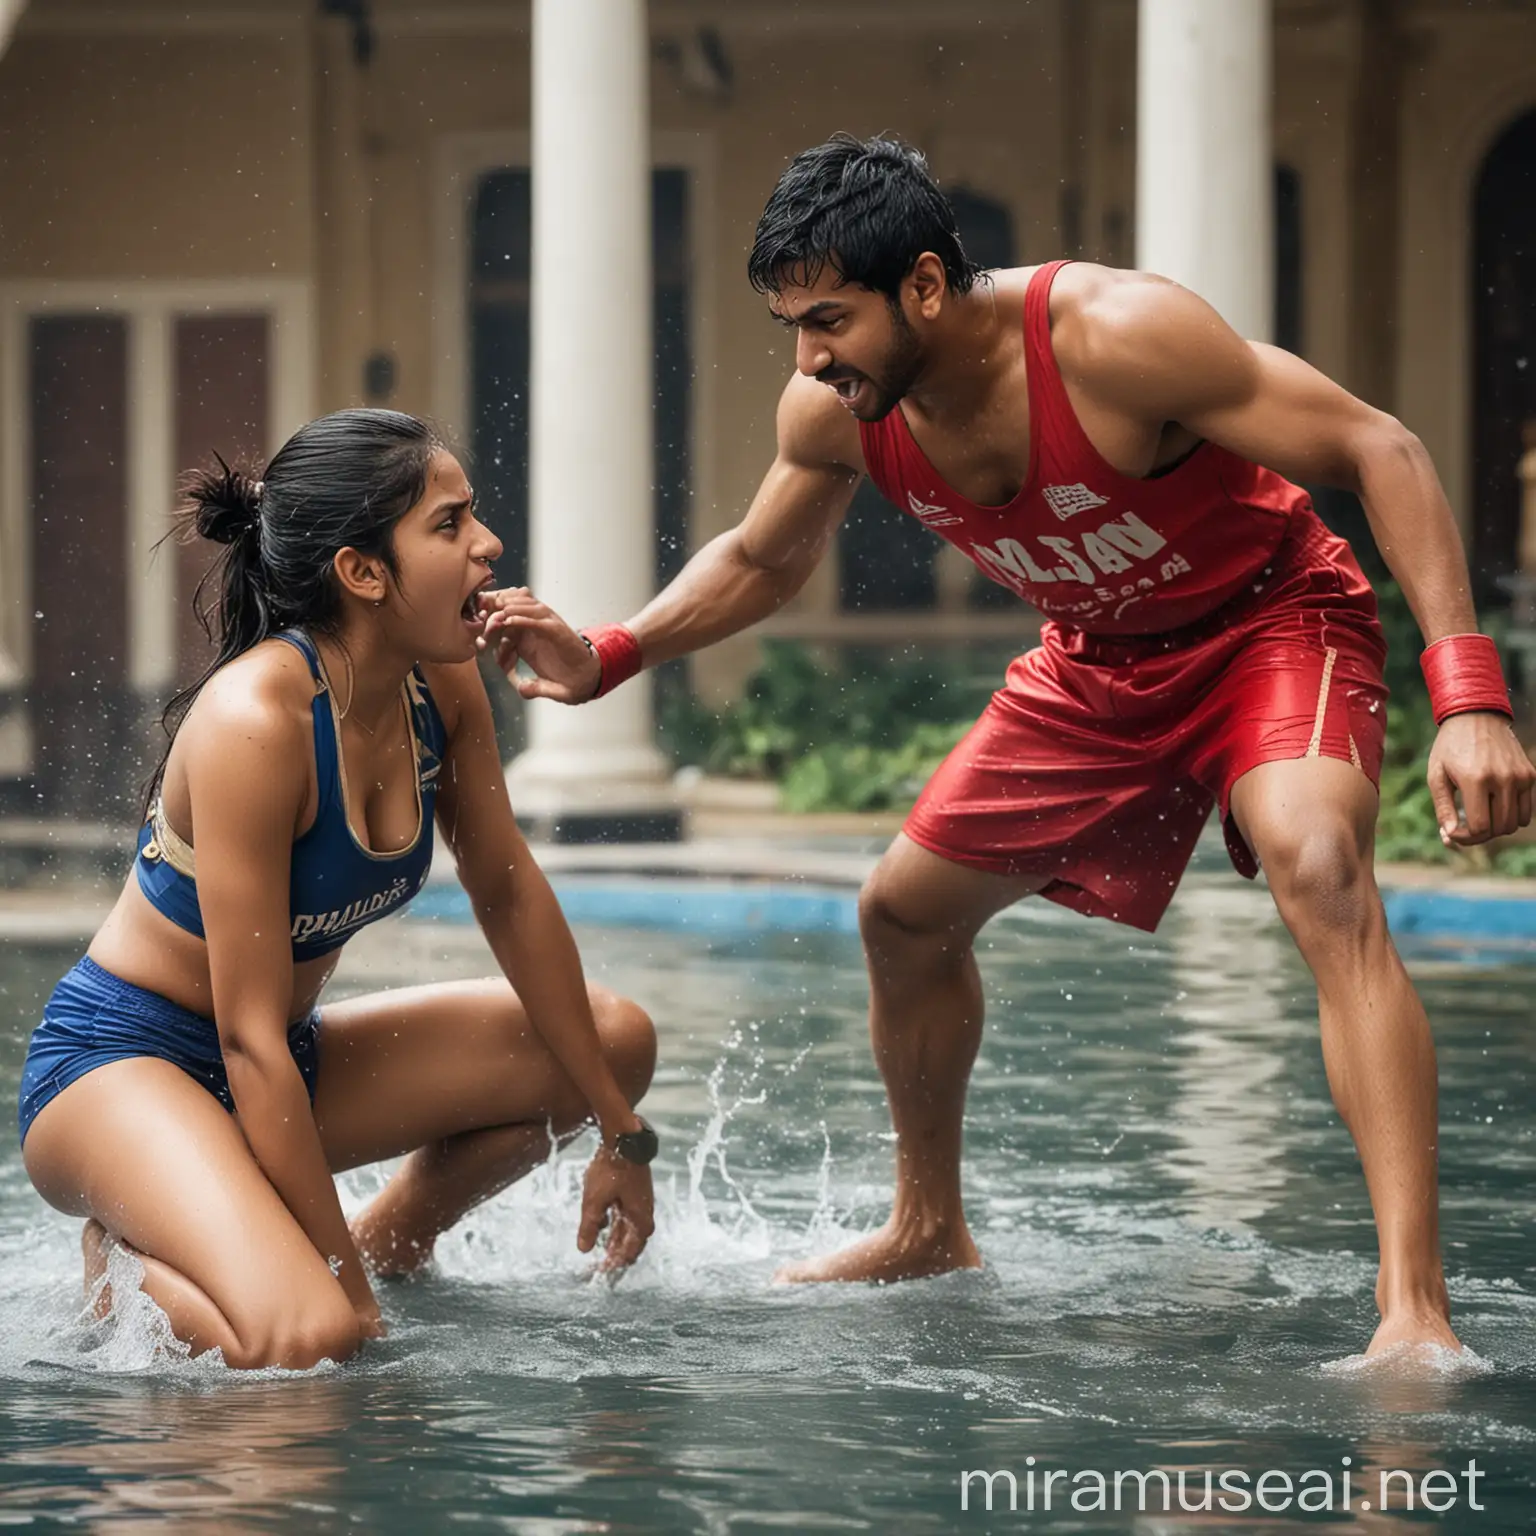 classic college boxing: indian girl in singlet vs indian guy in singlet, image,, INDIAN girl on the floor, knocked out, both are angry, in water ring, photo, palace